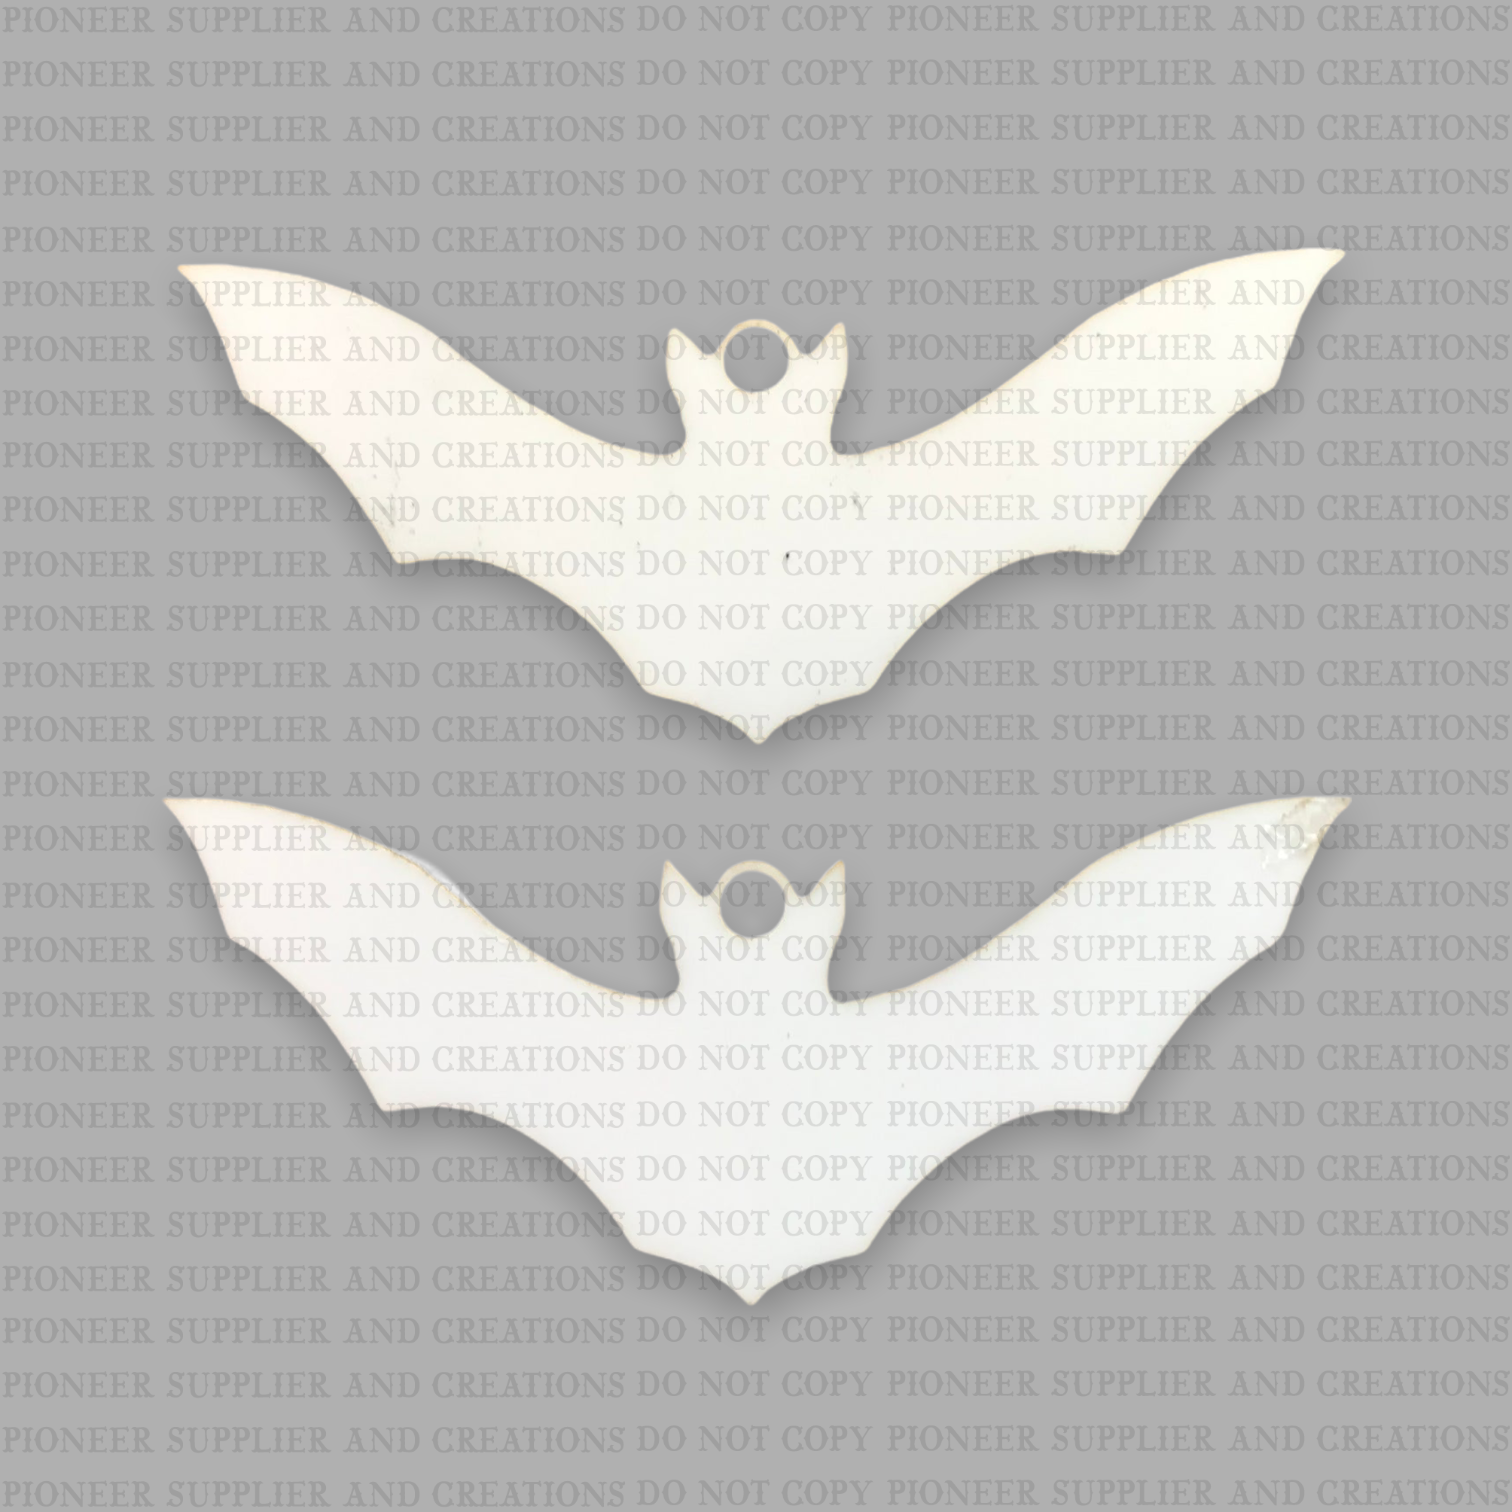 Bat Shaped Earring Sublimation Blanks - Pioneer Supplier & Creations